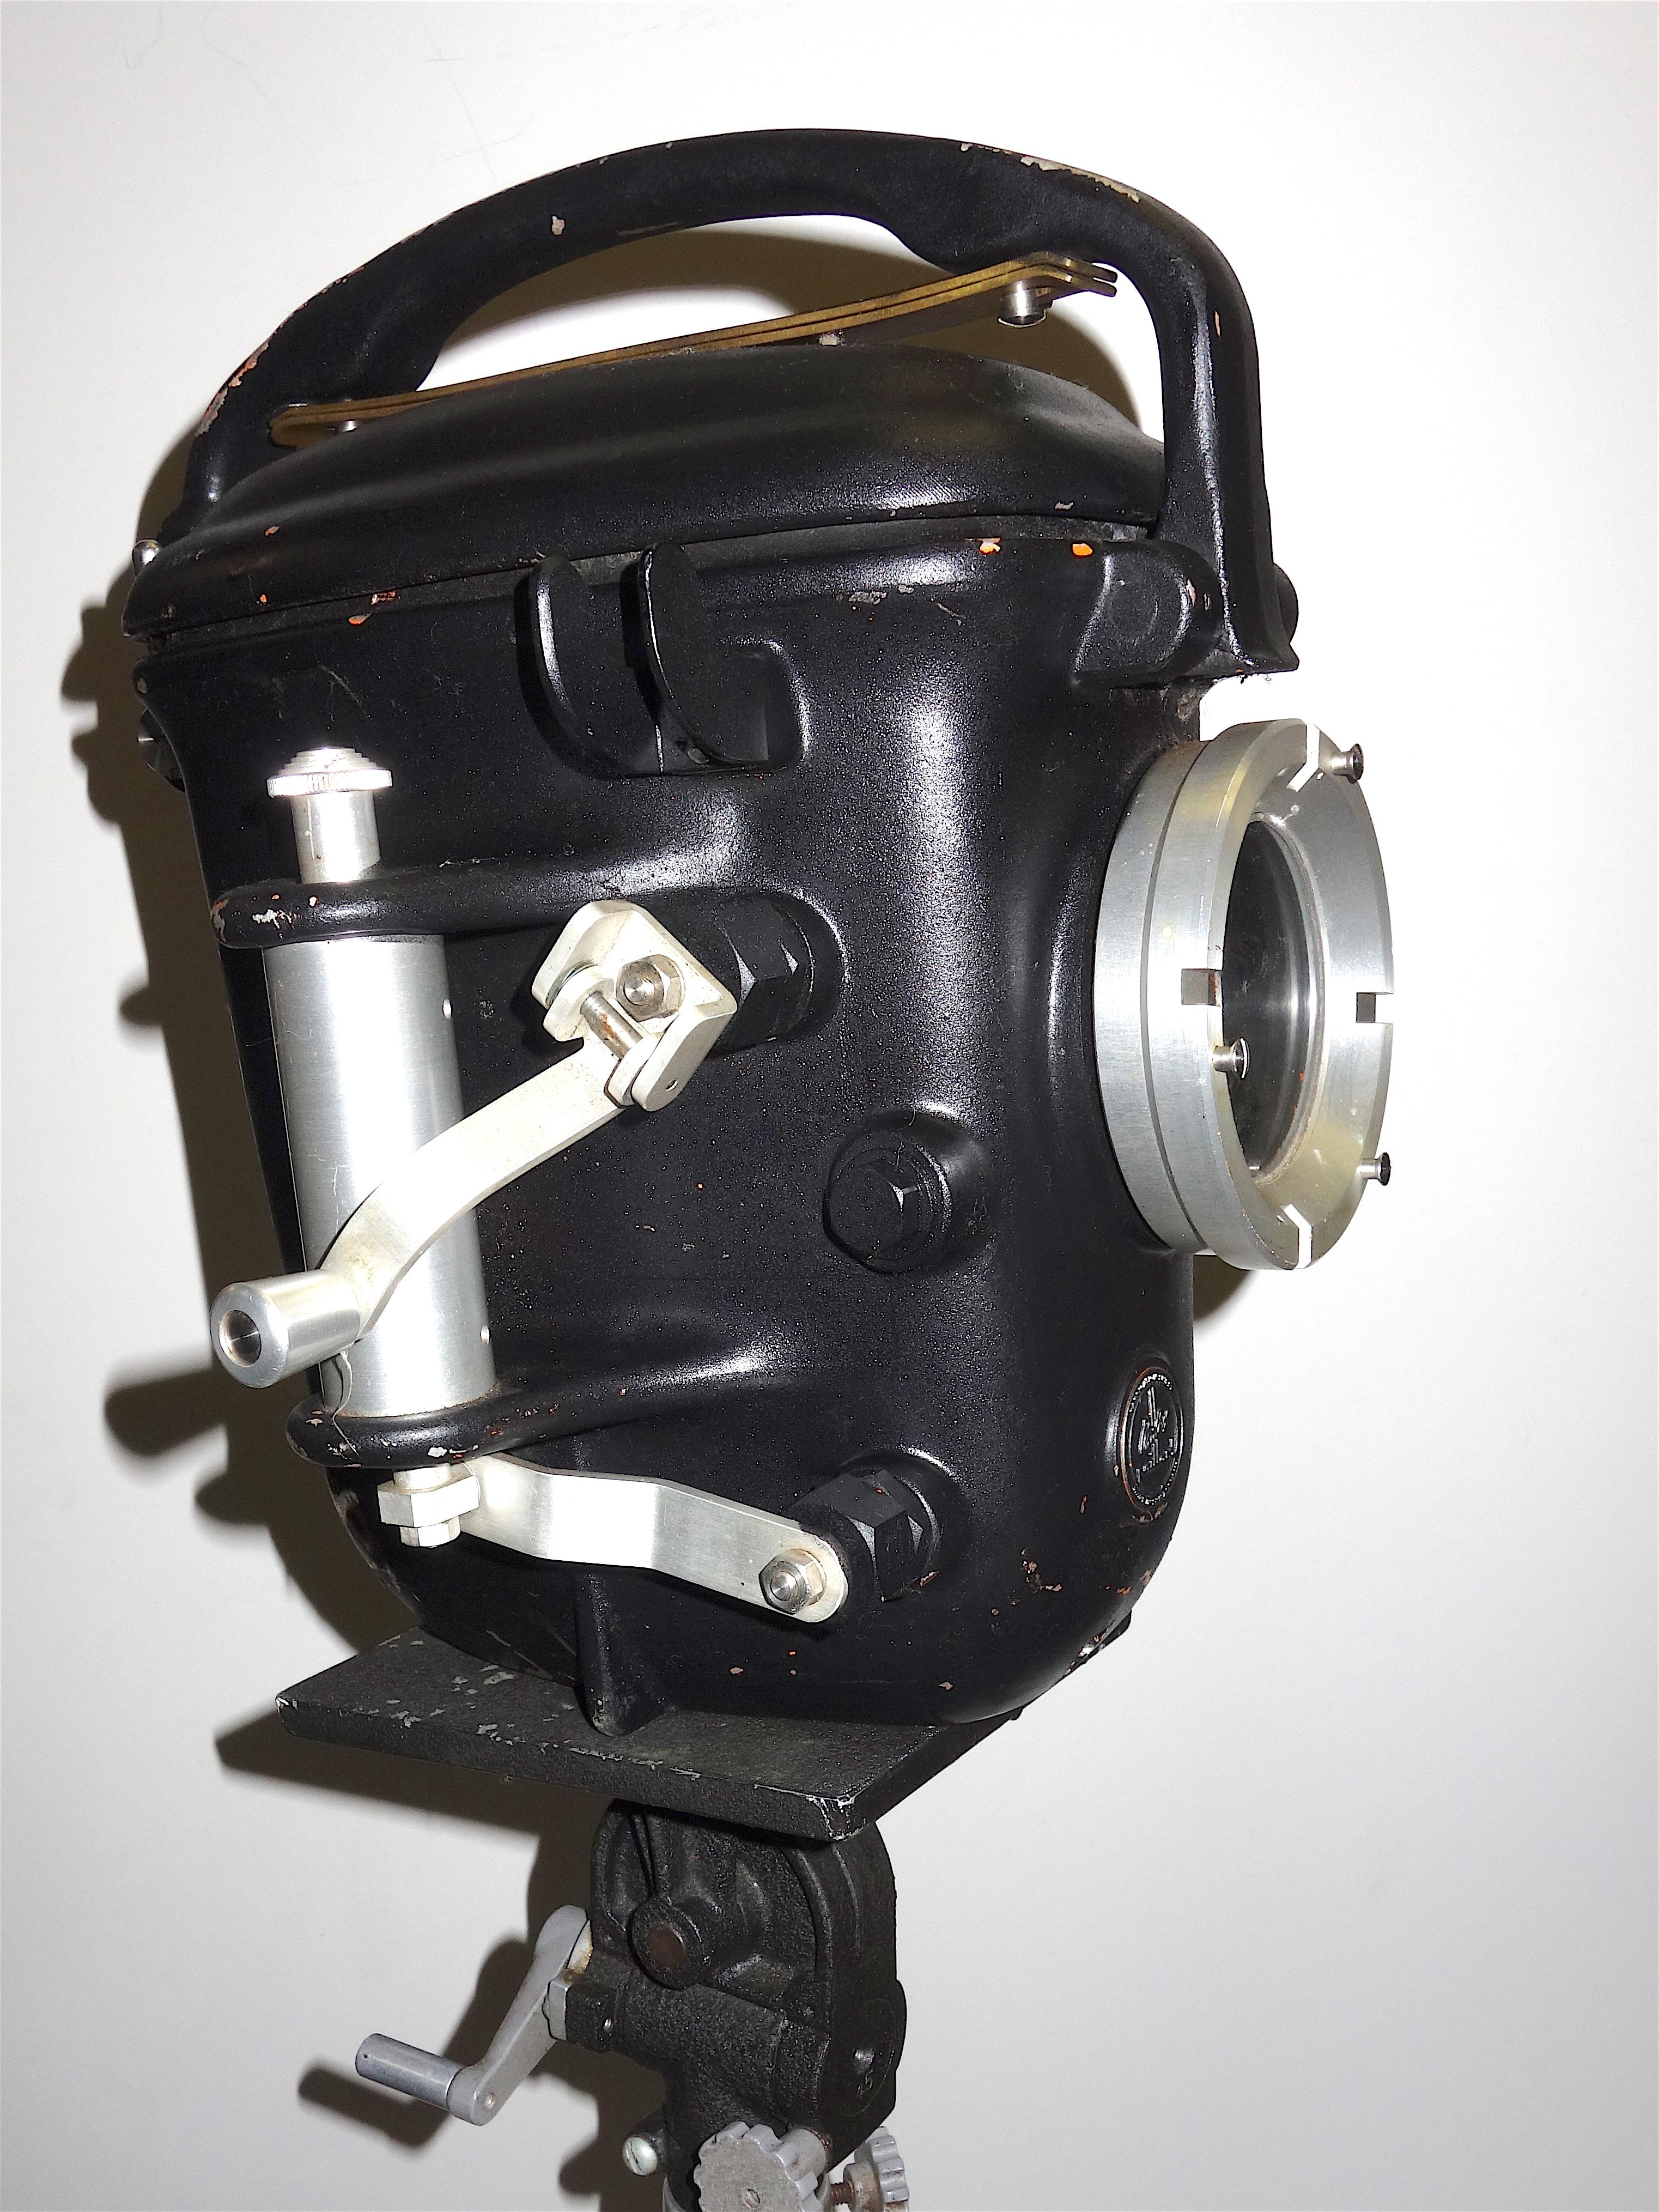 Offered here for your perusal is this circa 1950s Bolex - Paillard Swiss Made 16mm underwater camera housing on a mid century Majestic crank up metal tripod with a geared pan head.

Showing the scars of underwater cinematography during its